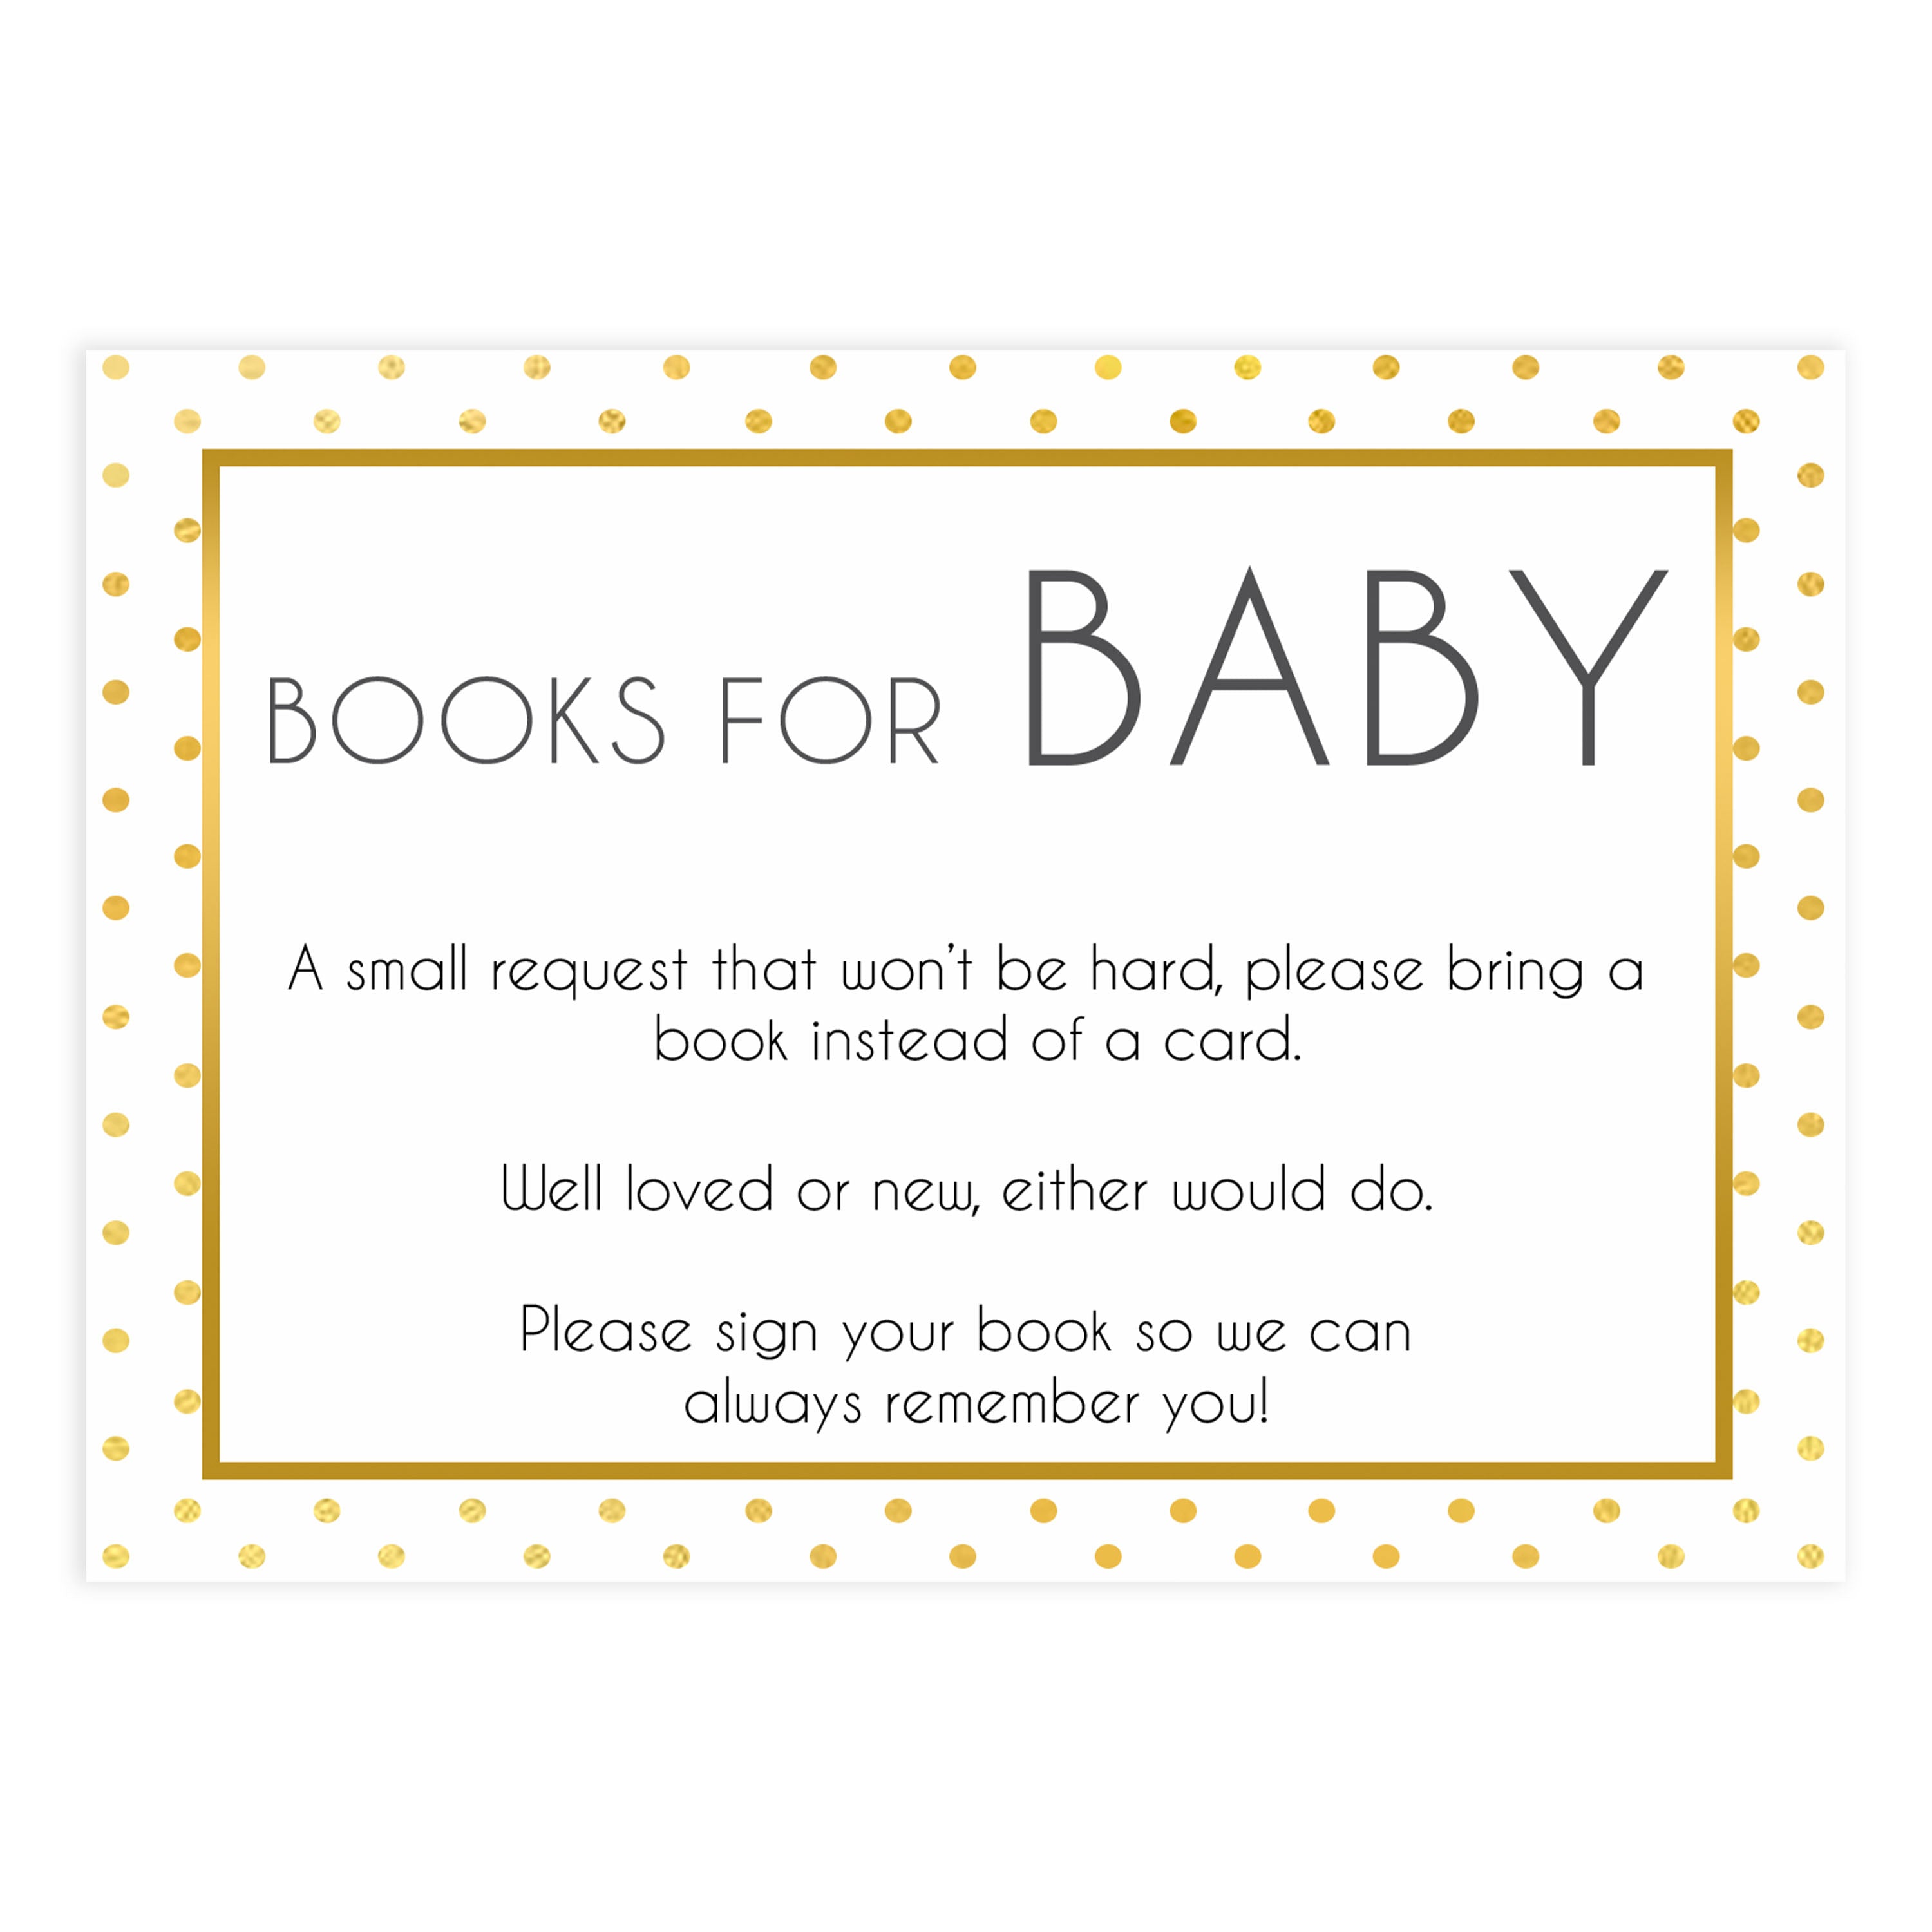 bring a book, books or baby insert, Printable baby shower games, baby gold dots fun baby games, baby shower games, fun baby shower ideas, top baby shower ideas, gold glitter shower baby shower, friends baby shower ideas